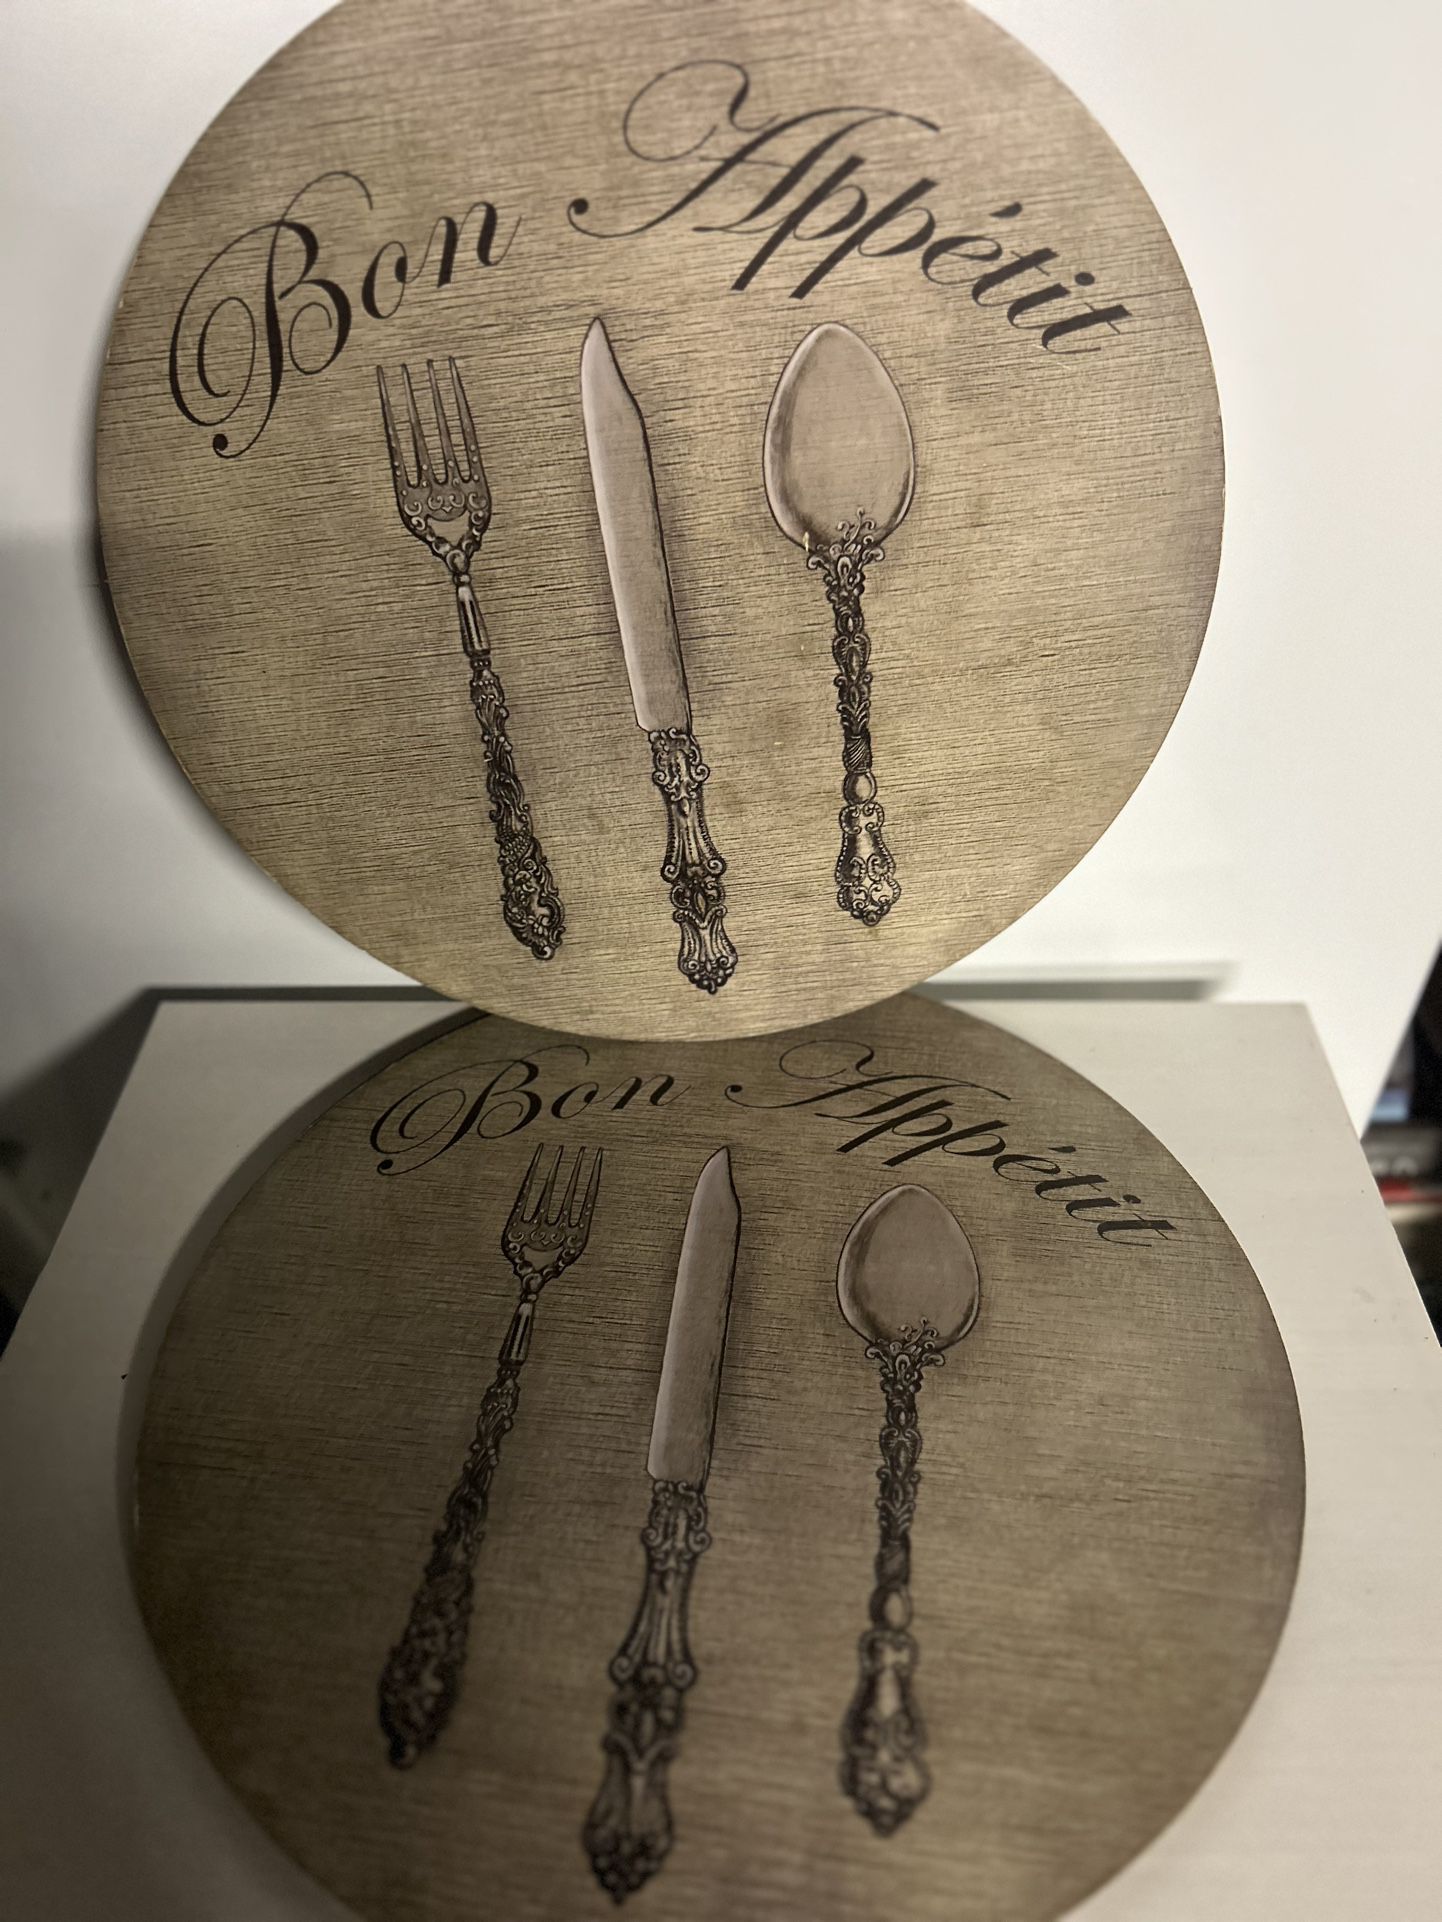 4 Charger Plates